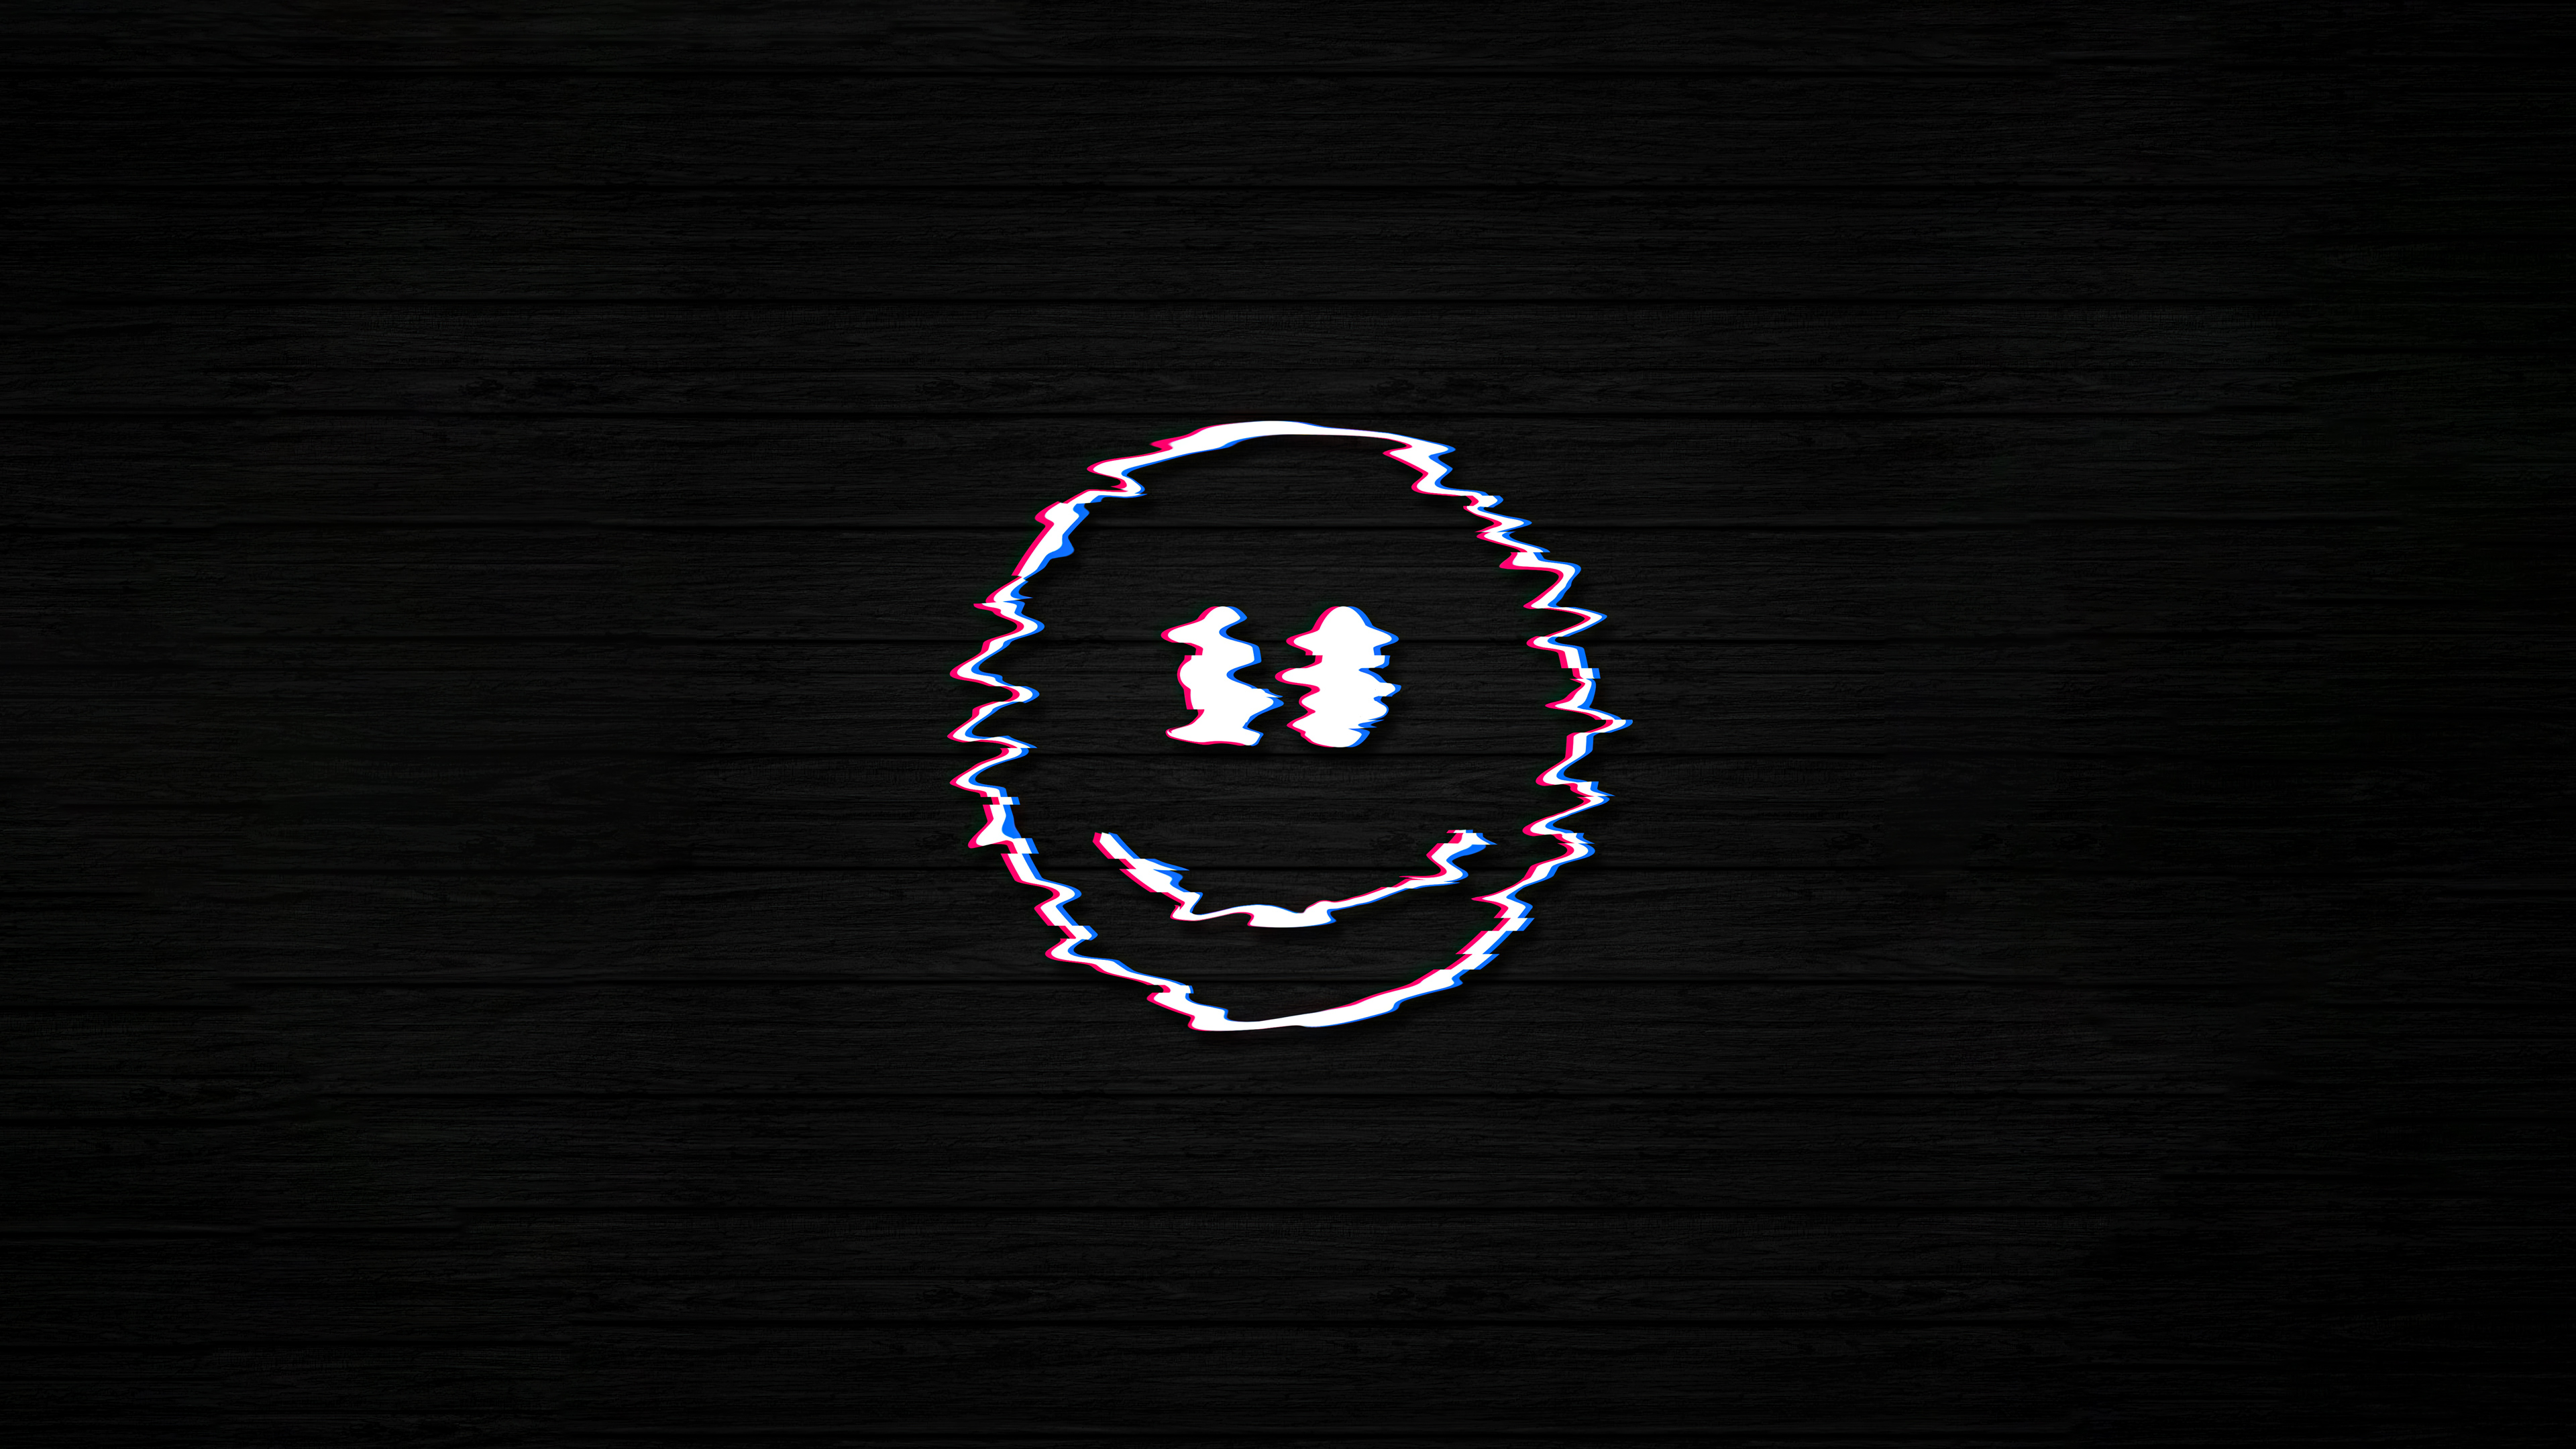 Smiley face on black background